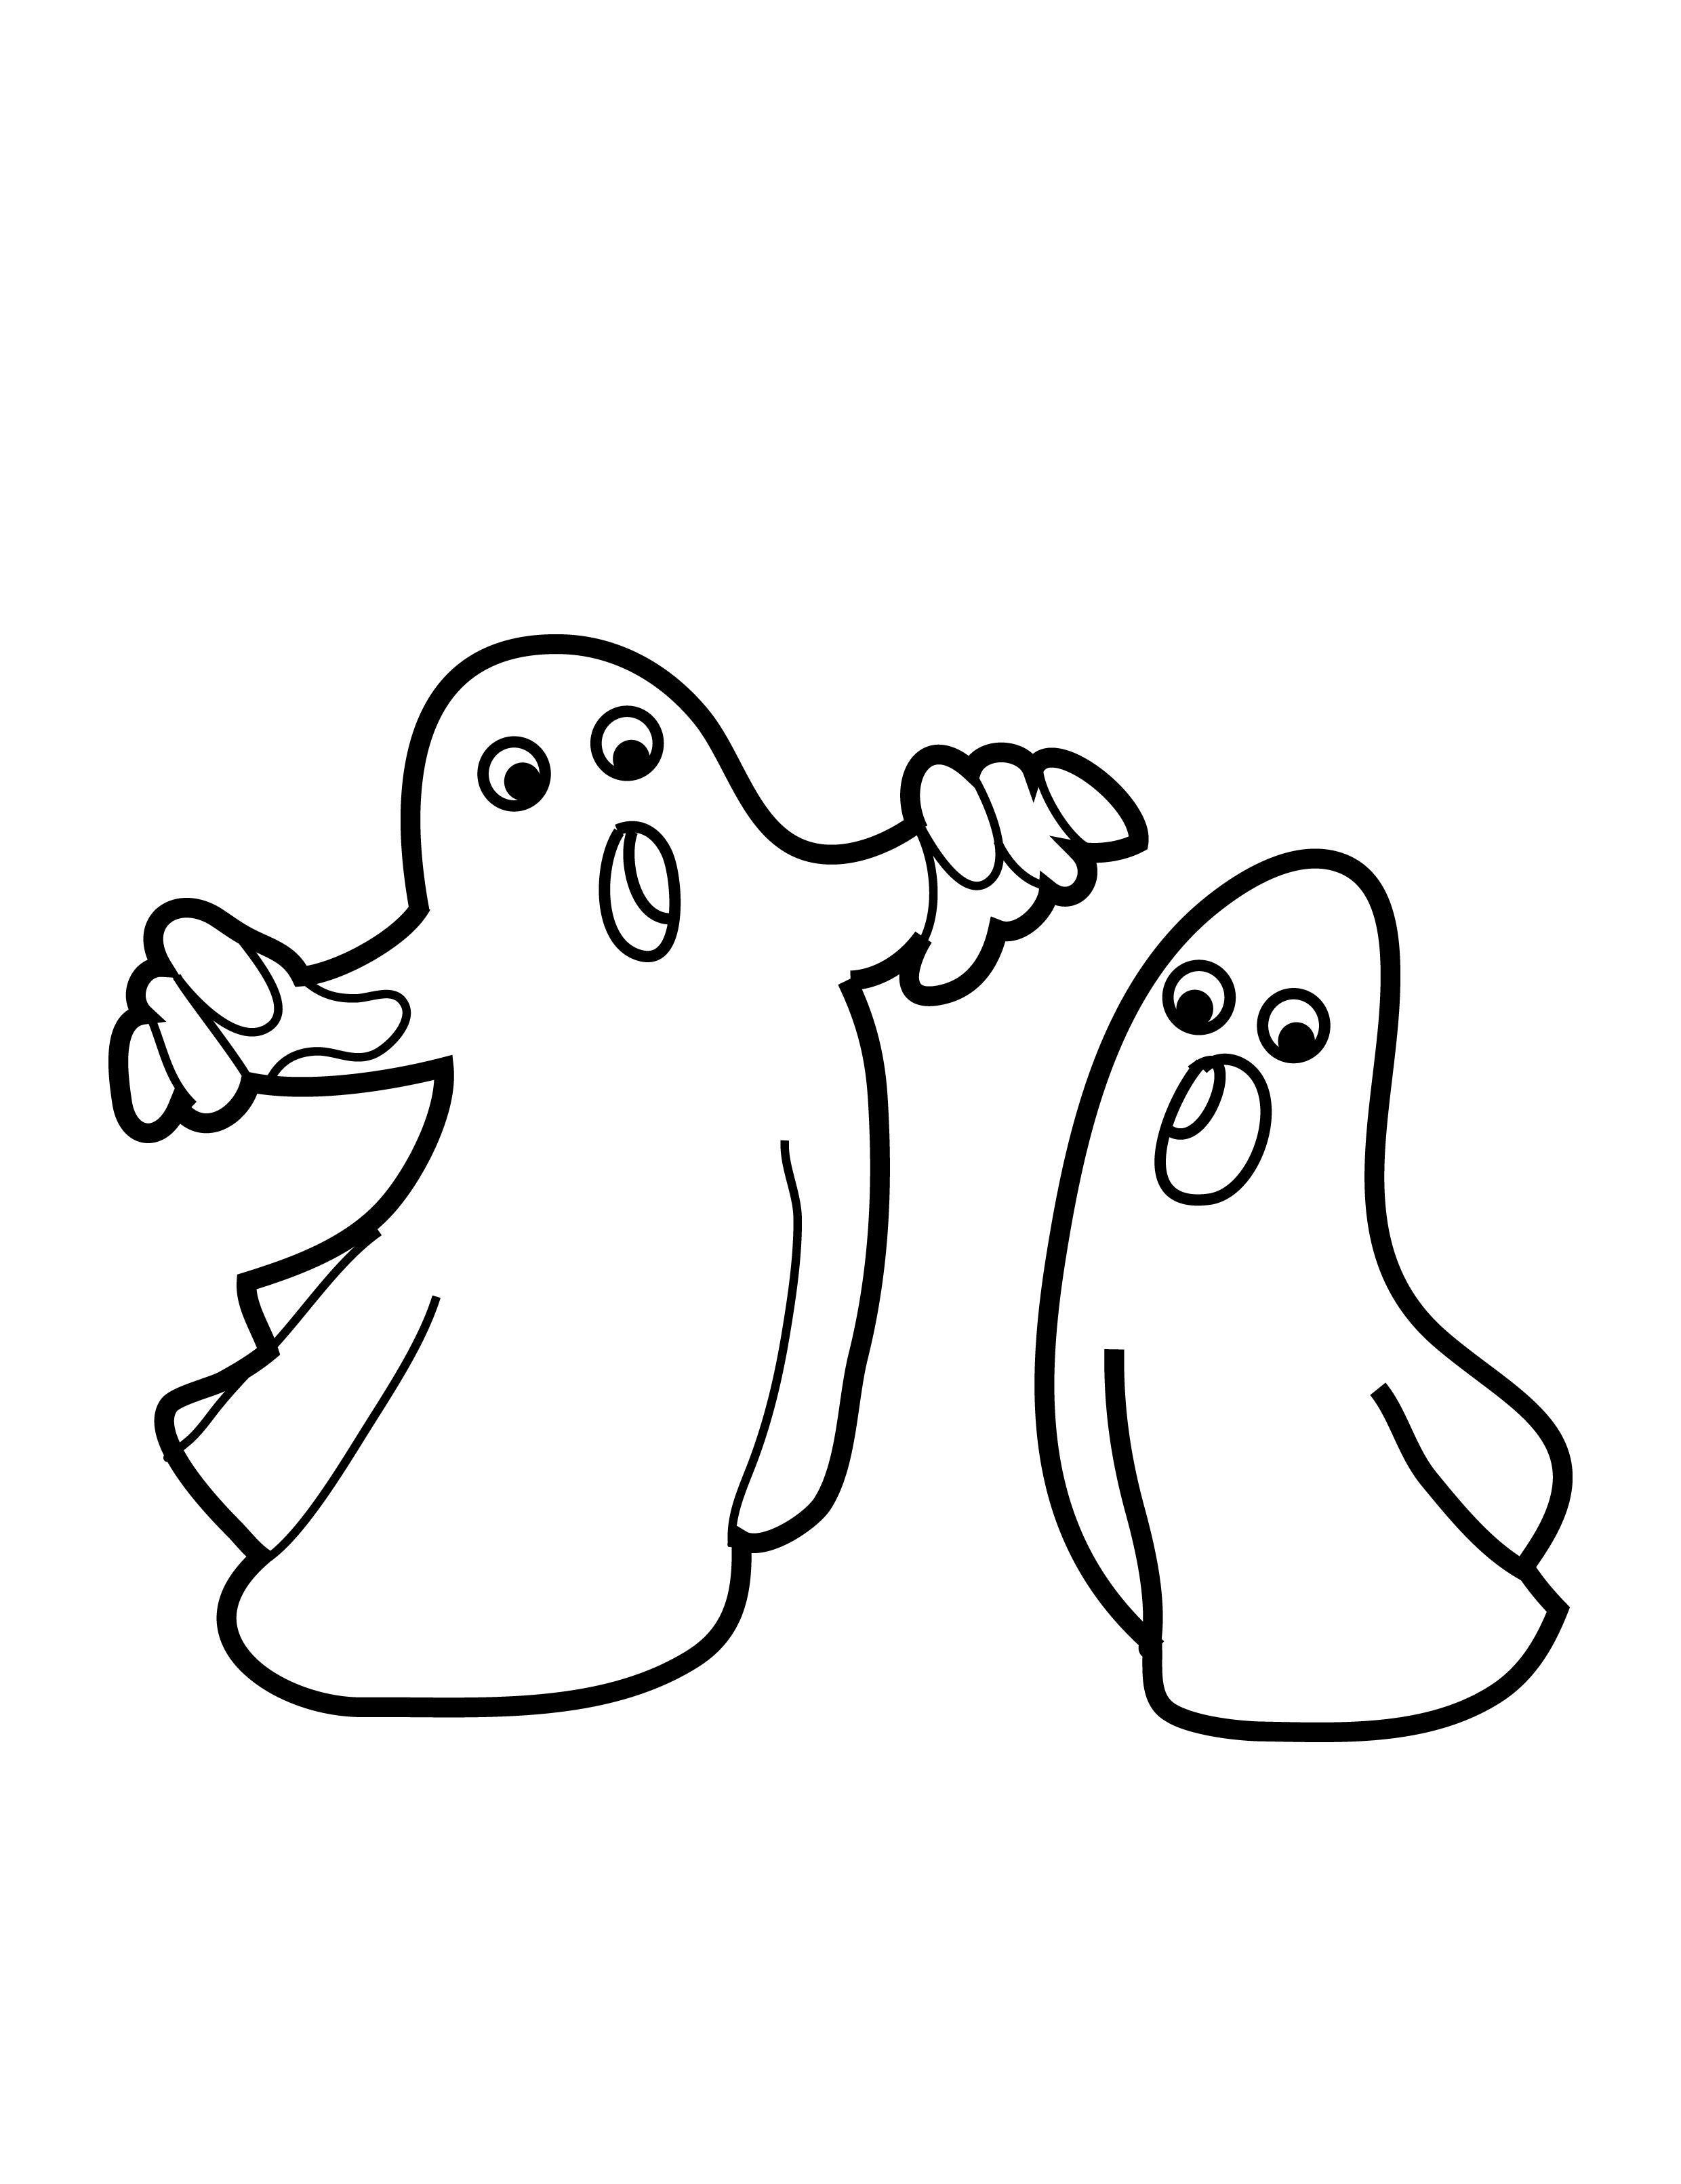 Halloween Coloring Pages For Kids Ghosts  Hallowen Coloring Pages